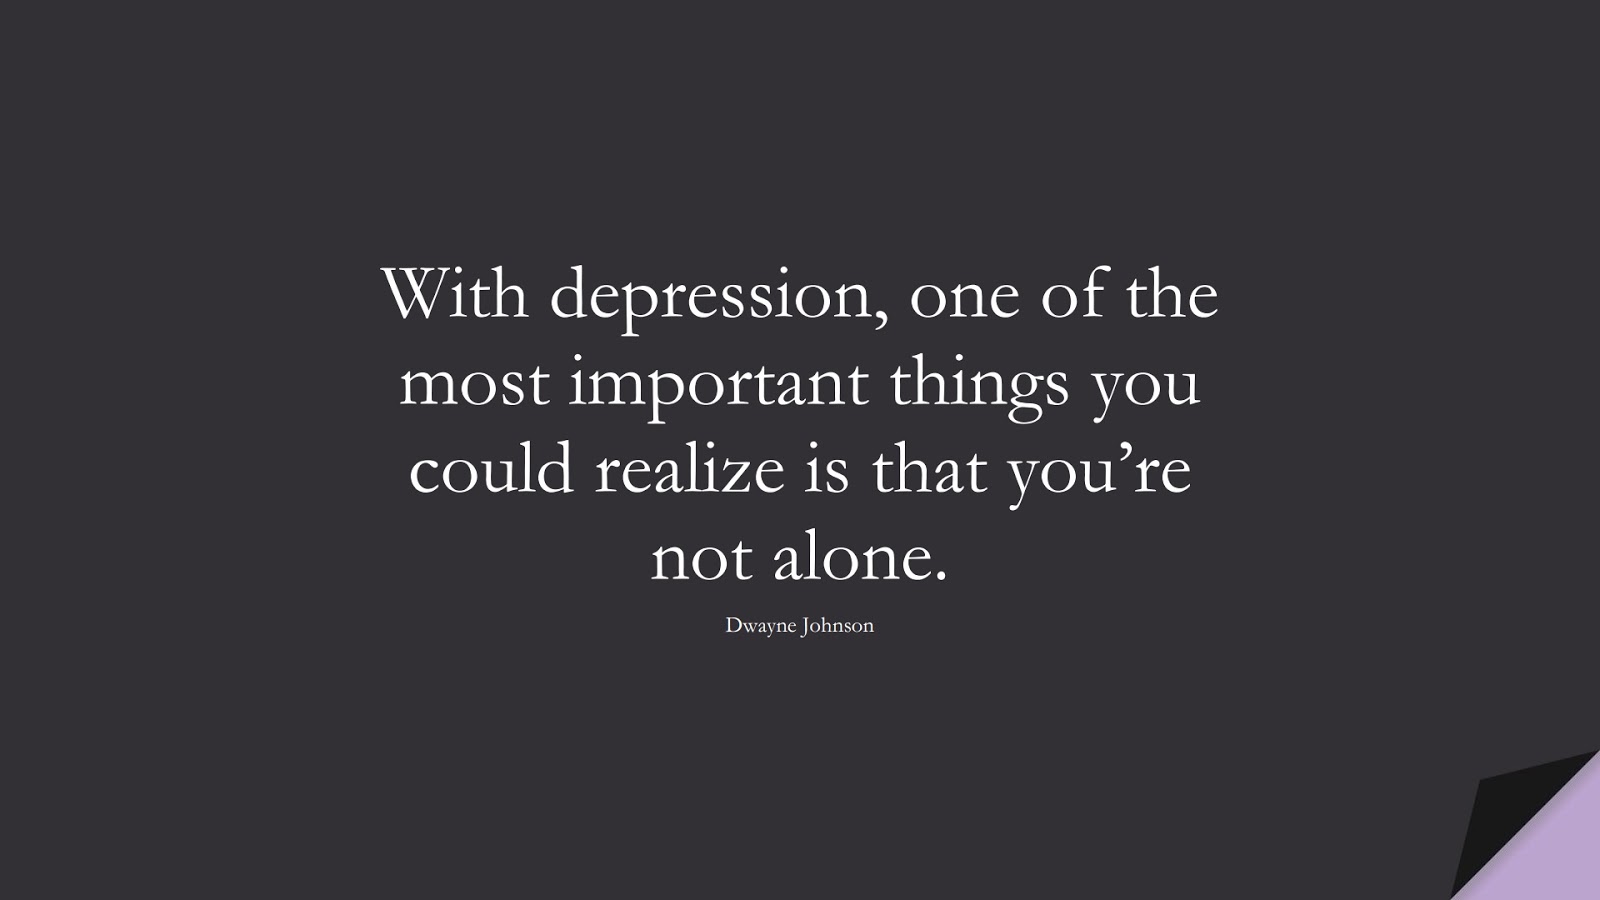 With depression, one of the most important things you could realize is that you’re not alone. (Dwayne Johnson);  #DepressionQuotes